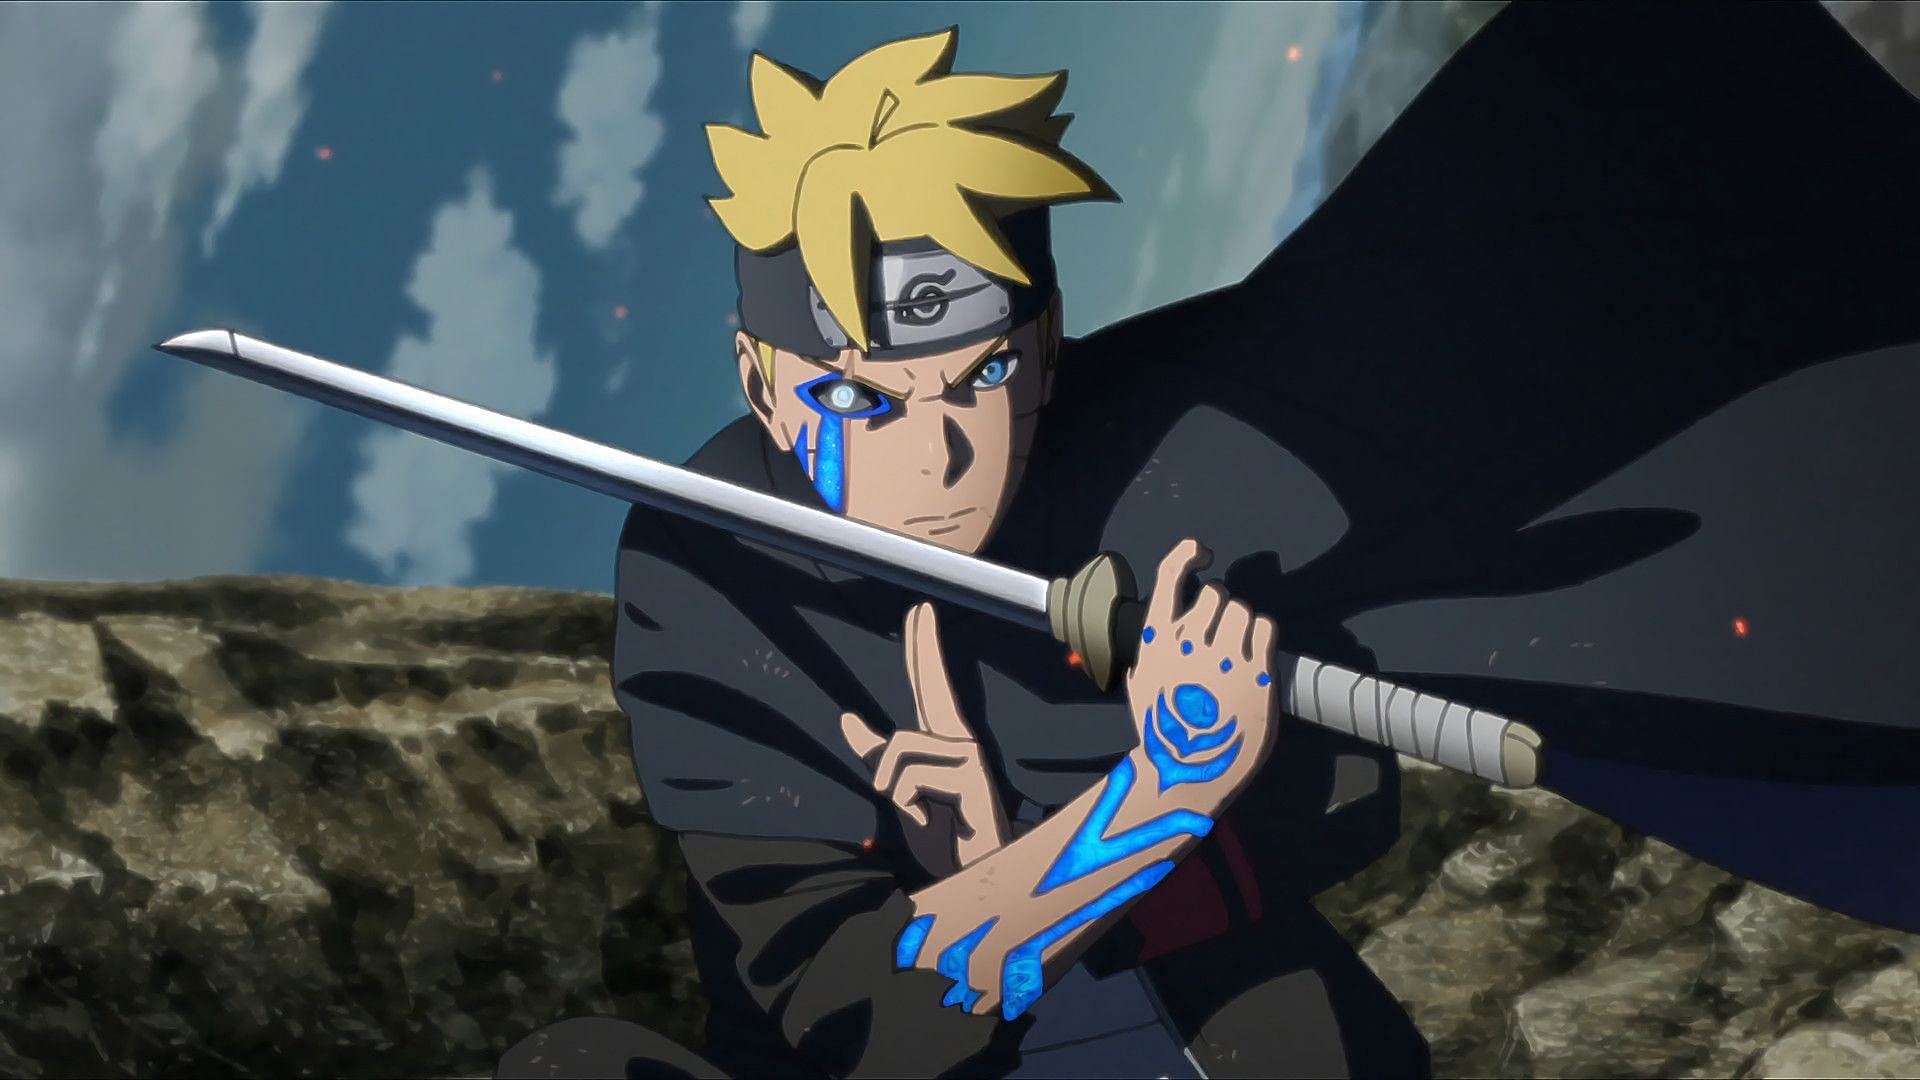 Why do Naruto fans have the need to compare Naruto characters strength to  characters way out of their league? : r/Naruto